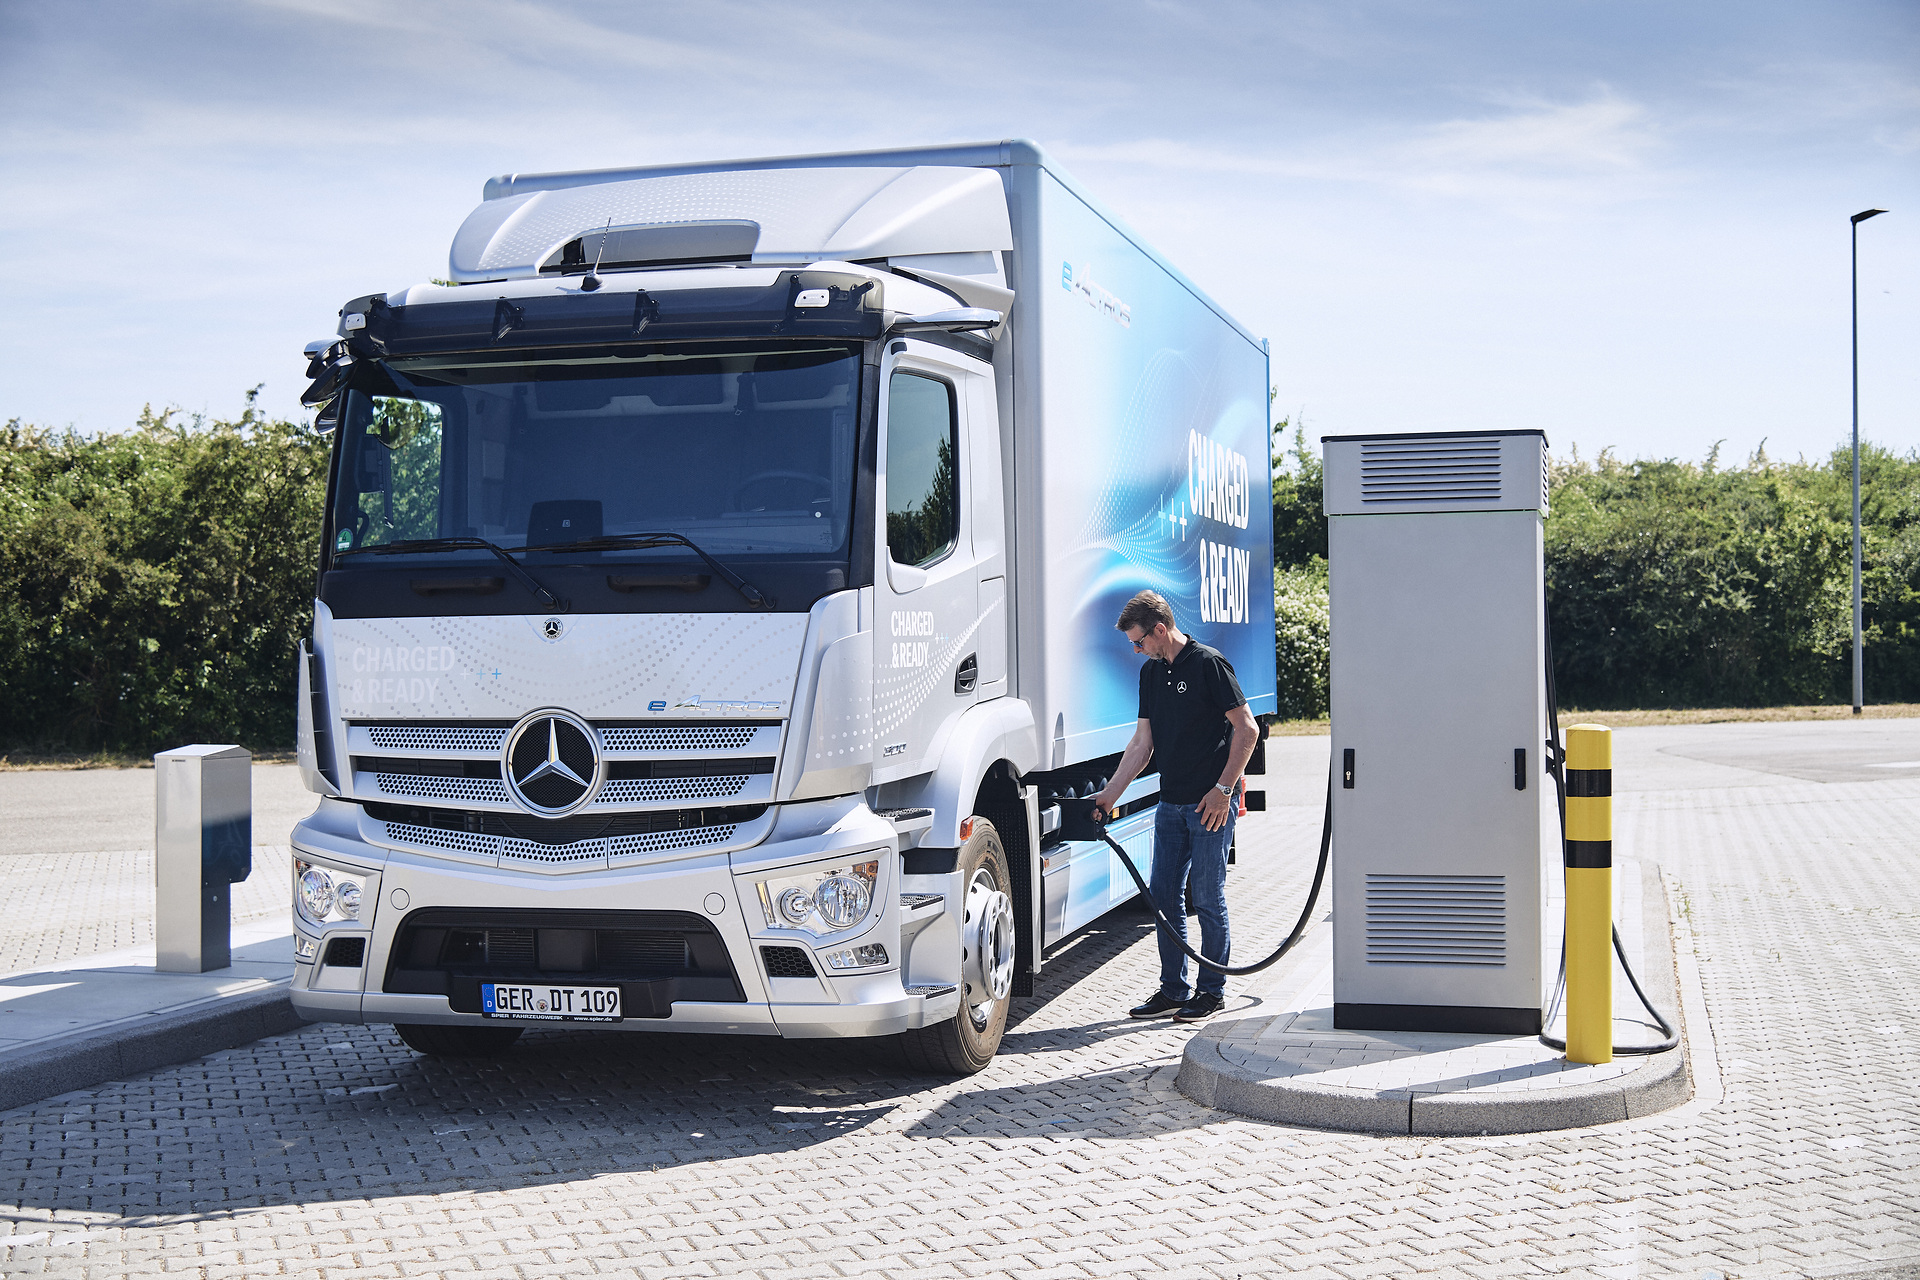 Mercedes-Benz Trucks continues to drive electrification forward - eActros LongHaul to hit the road in 2022